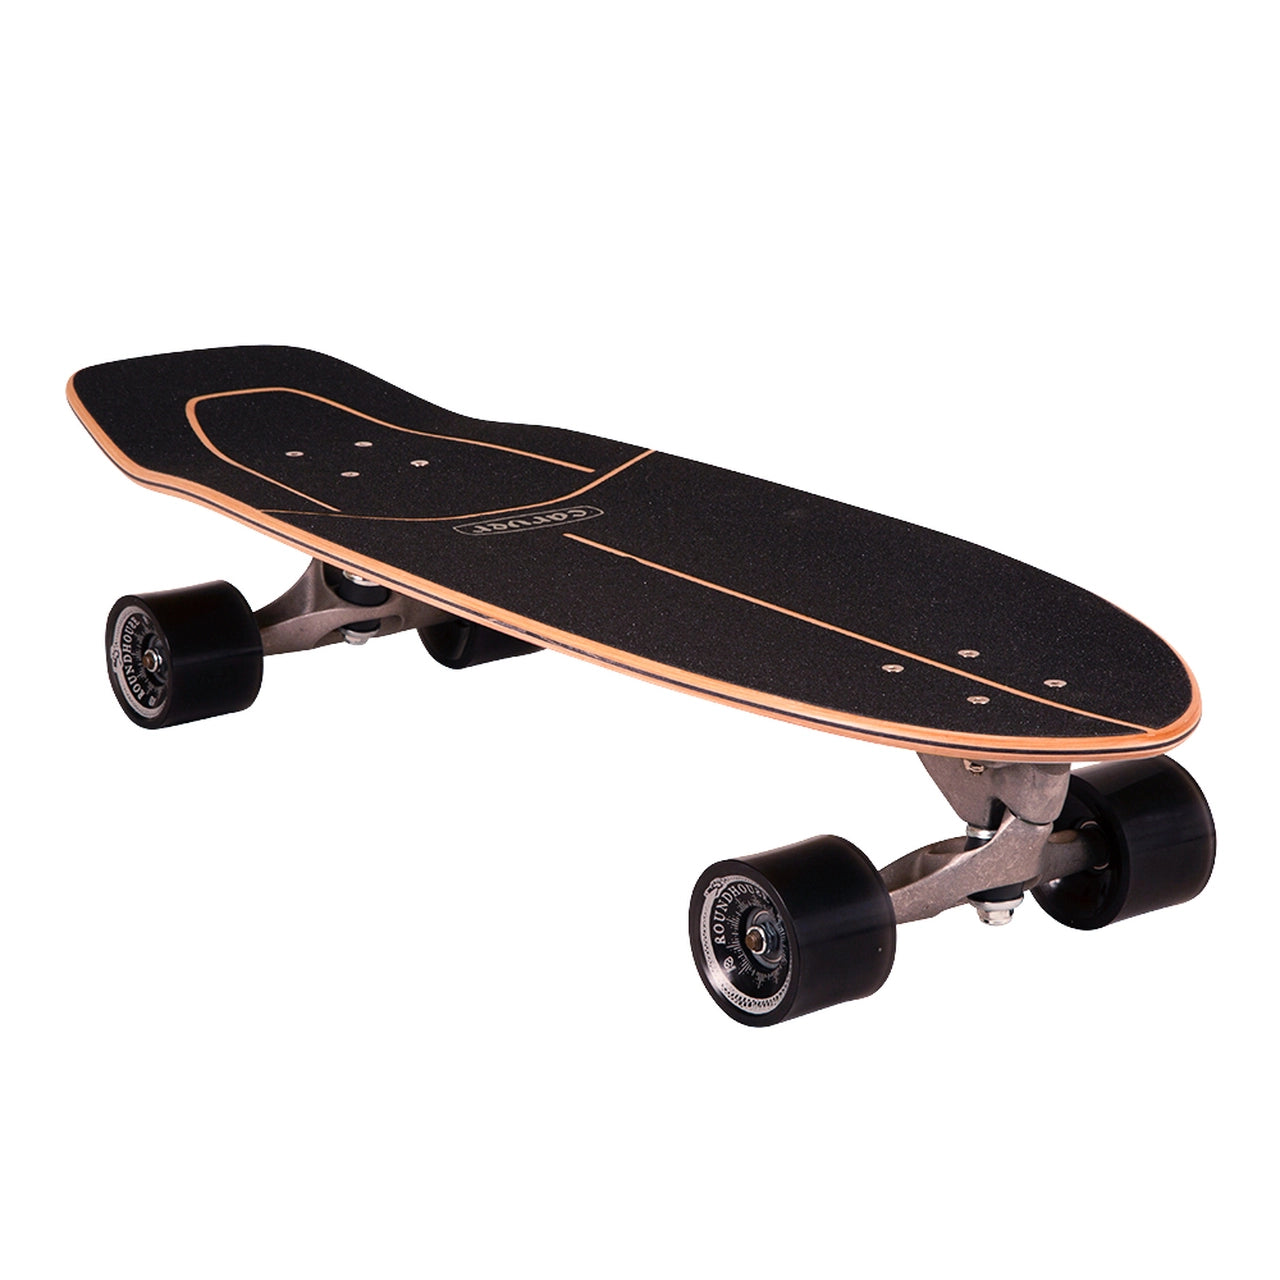 Carver 30.25" Firefly Surfskate  Complete CX